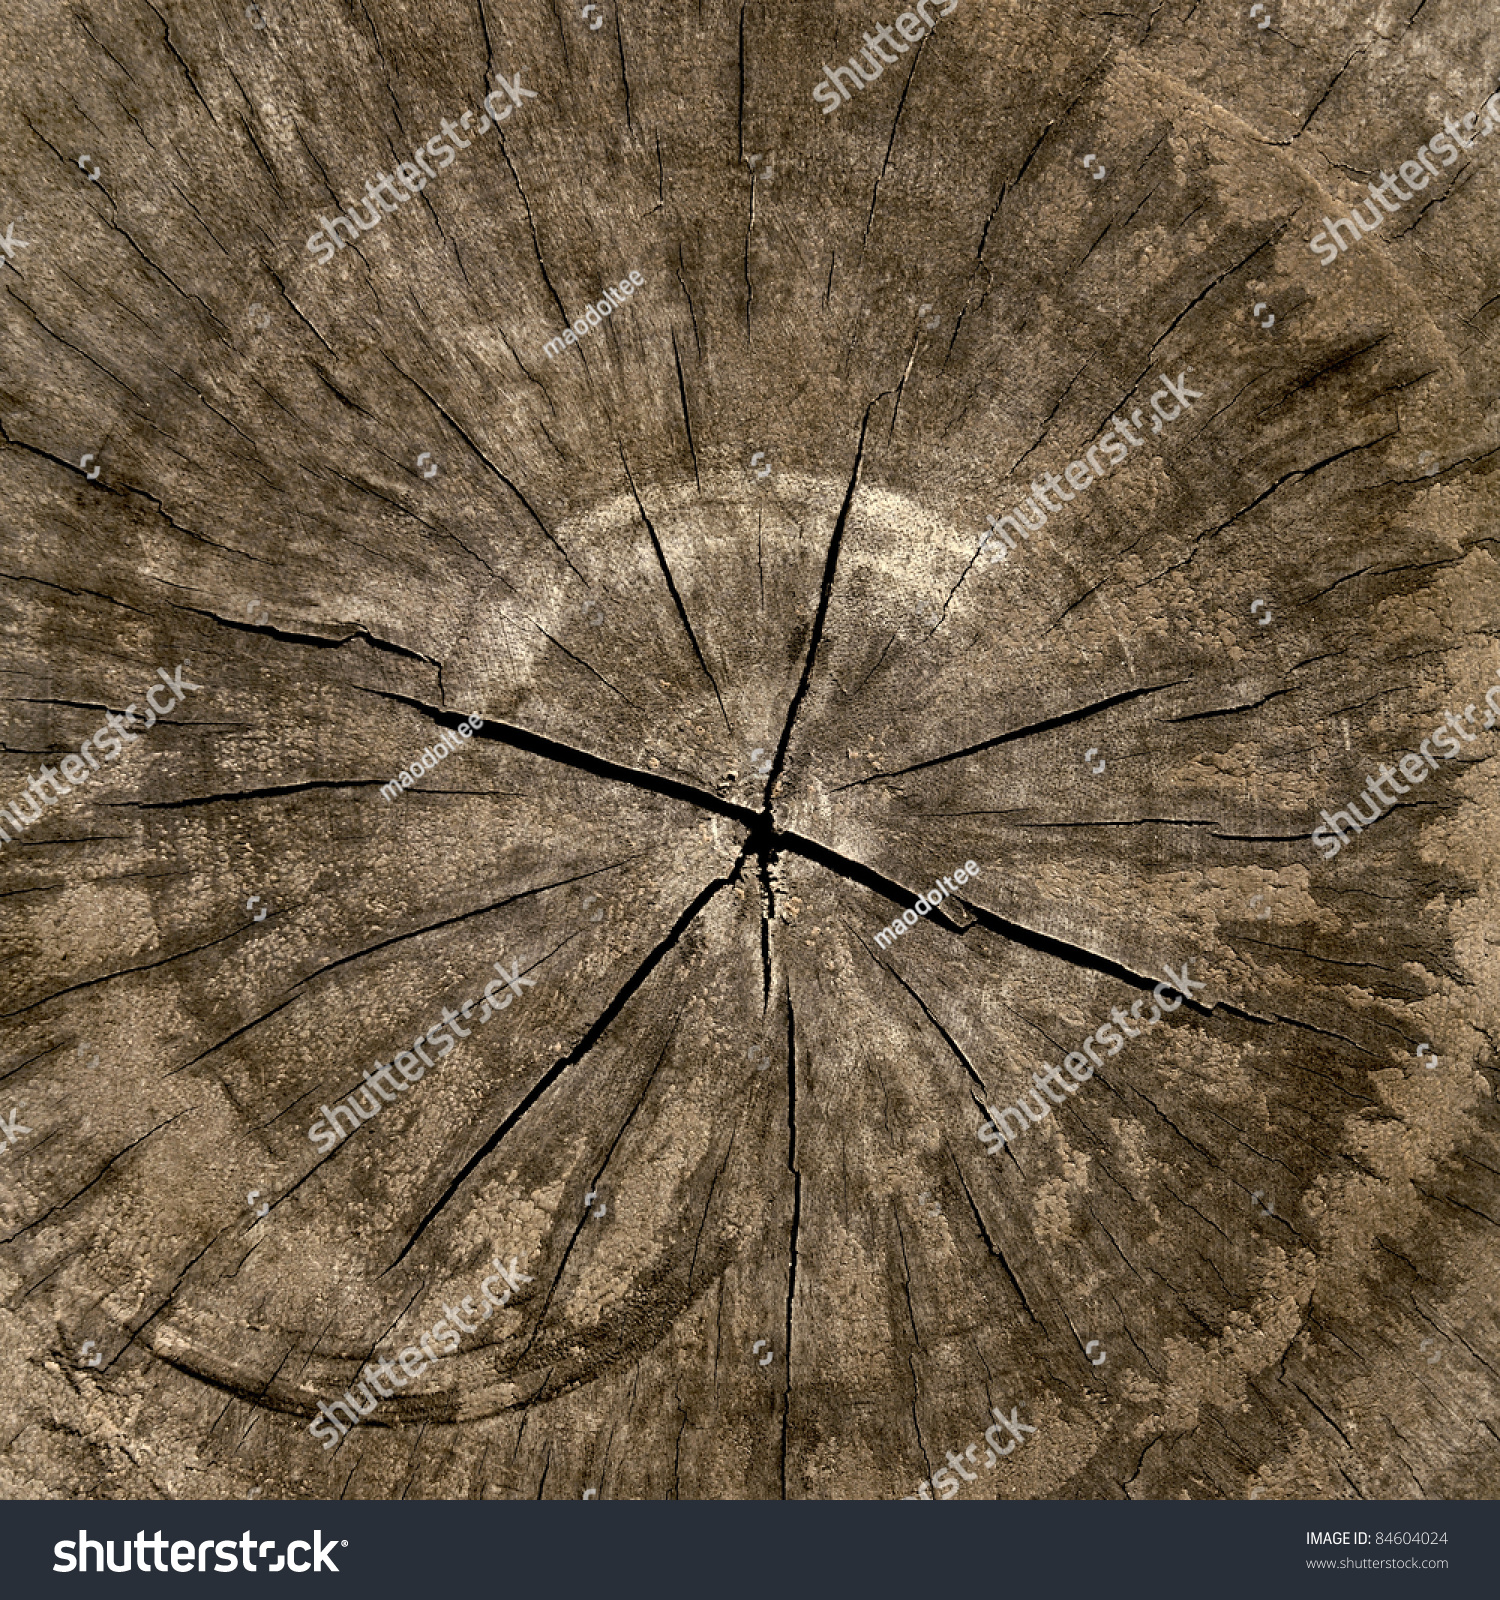 Cracked Section Wood Texture Stock Photo (Royalty Free) 84604024 ...